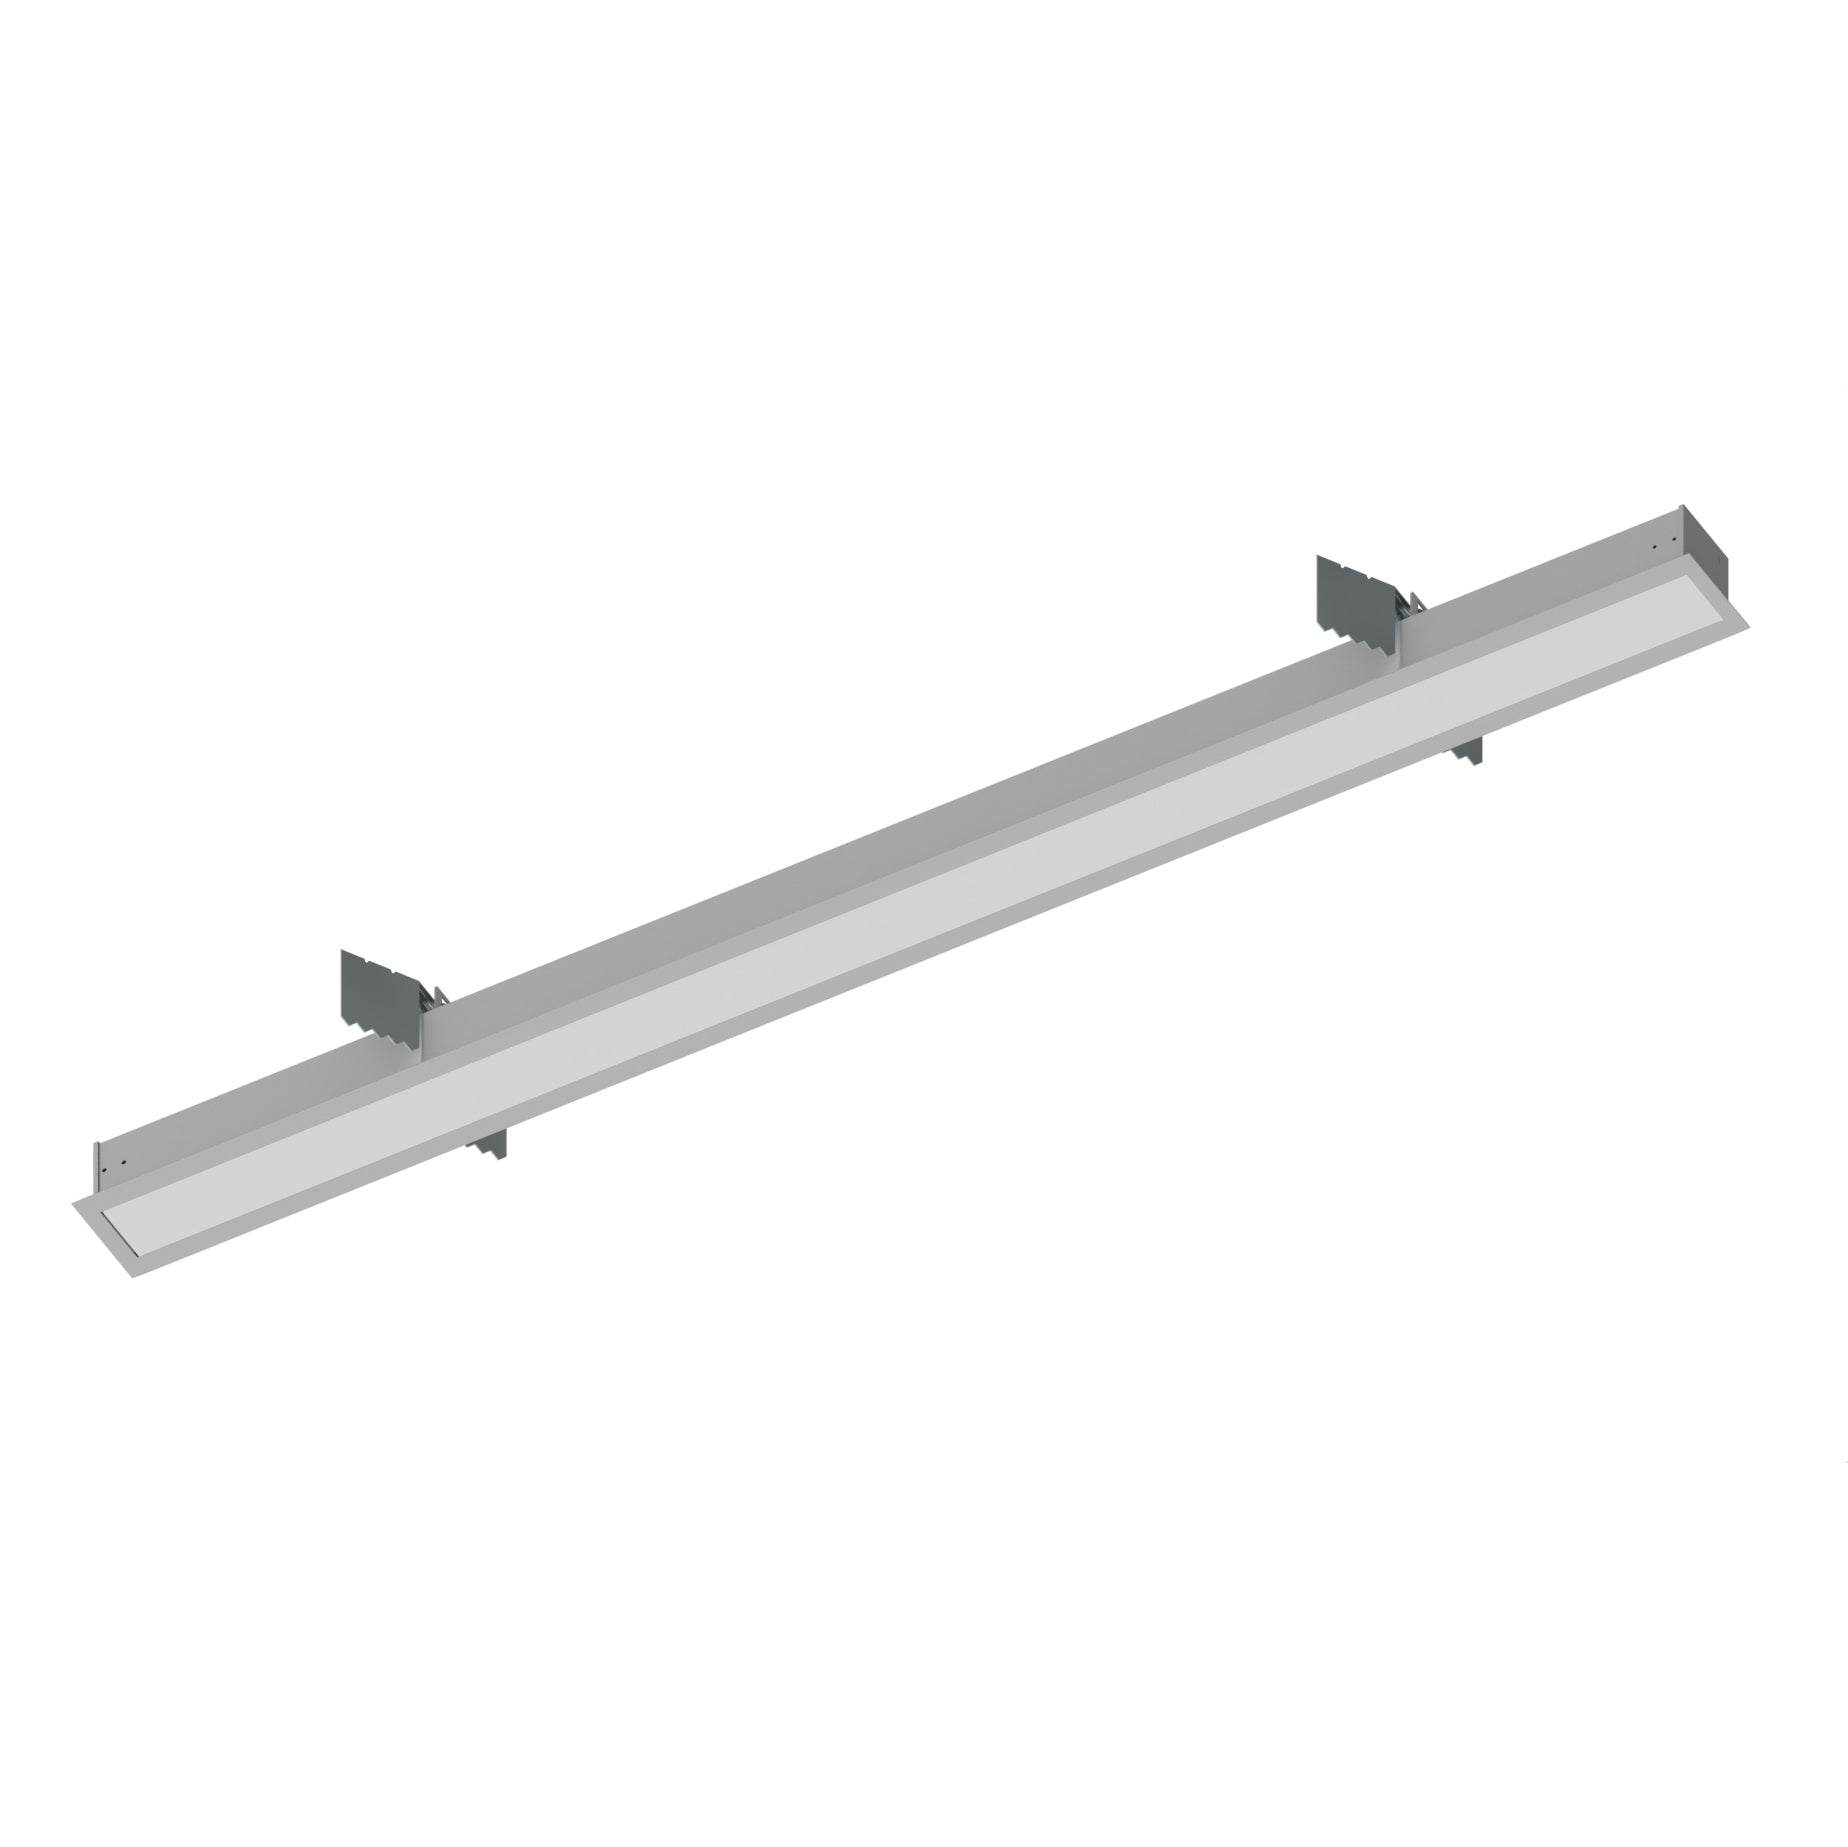 Nora Lighting NRLIN-41030A - Linear - 4' L-Line LED Recessed Linear, 4200lm / 3000K, Aluminum Finish